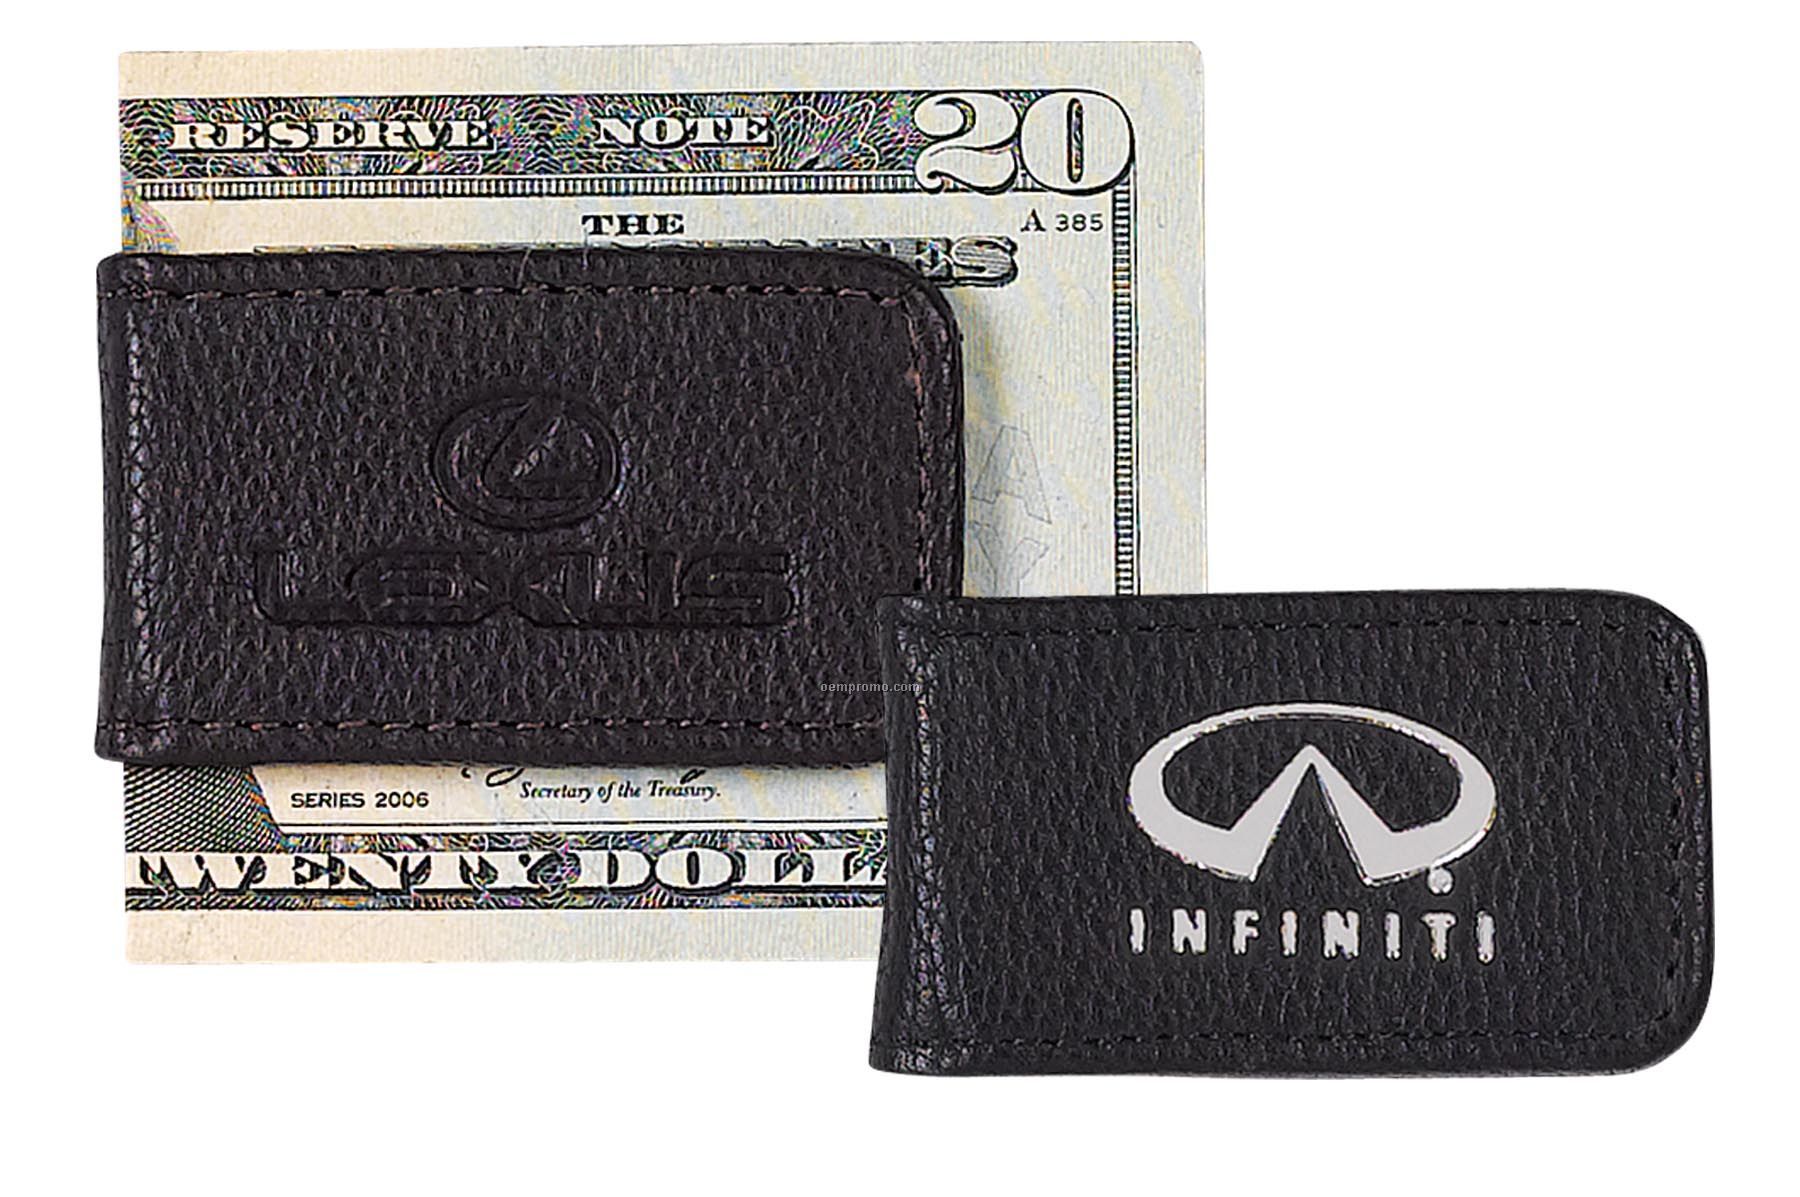 Magnetic Money Clip - Imported